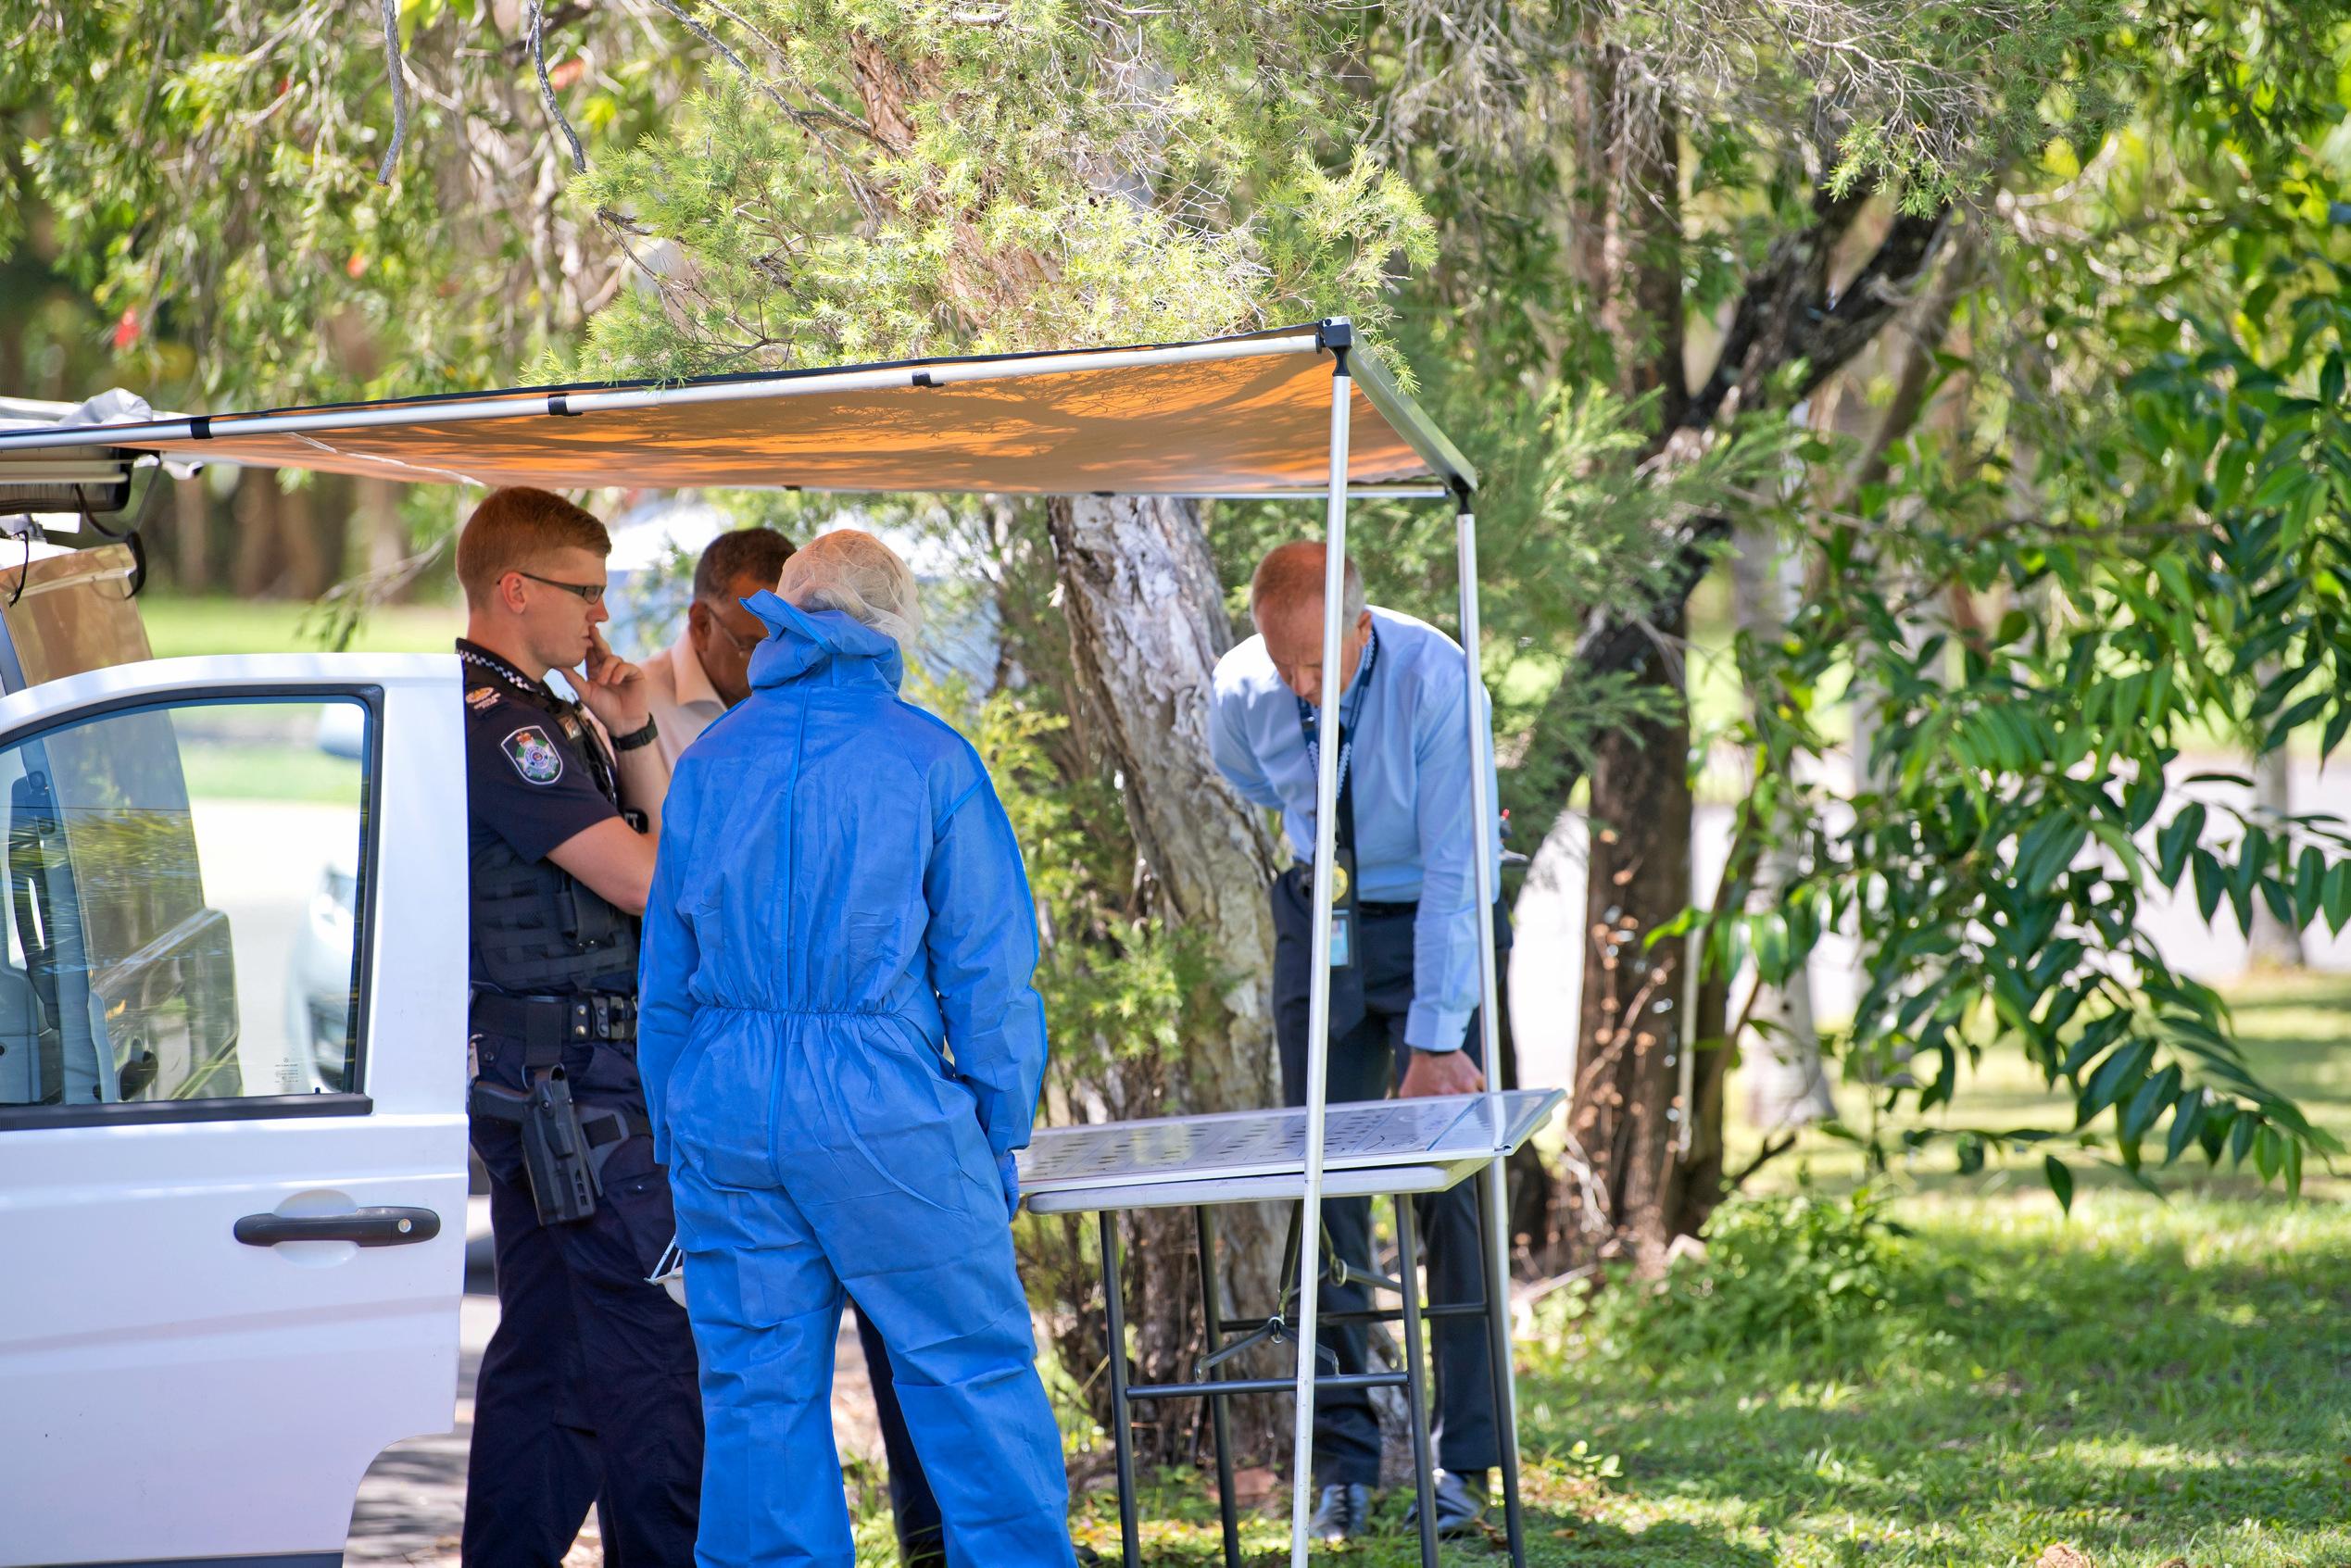 Police are investigating the suspicious death of a 20-year-old man who was allegedly involved in an altercation at an address in Gemini Court in Andergrove on New Year's Eve.